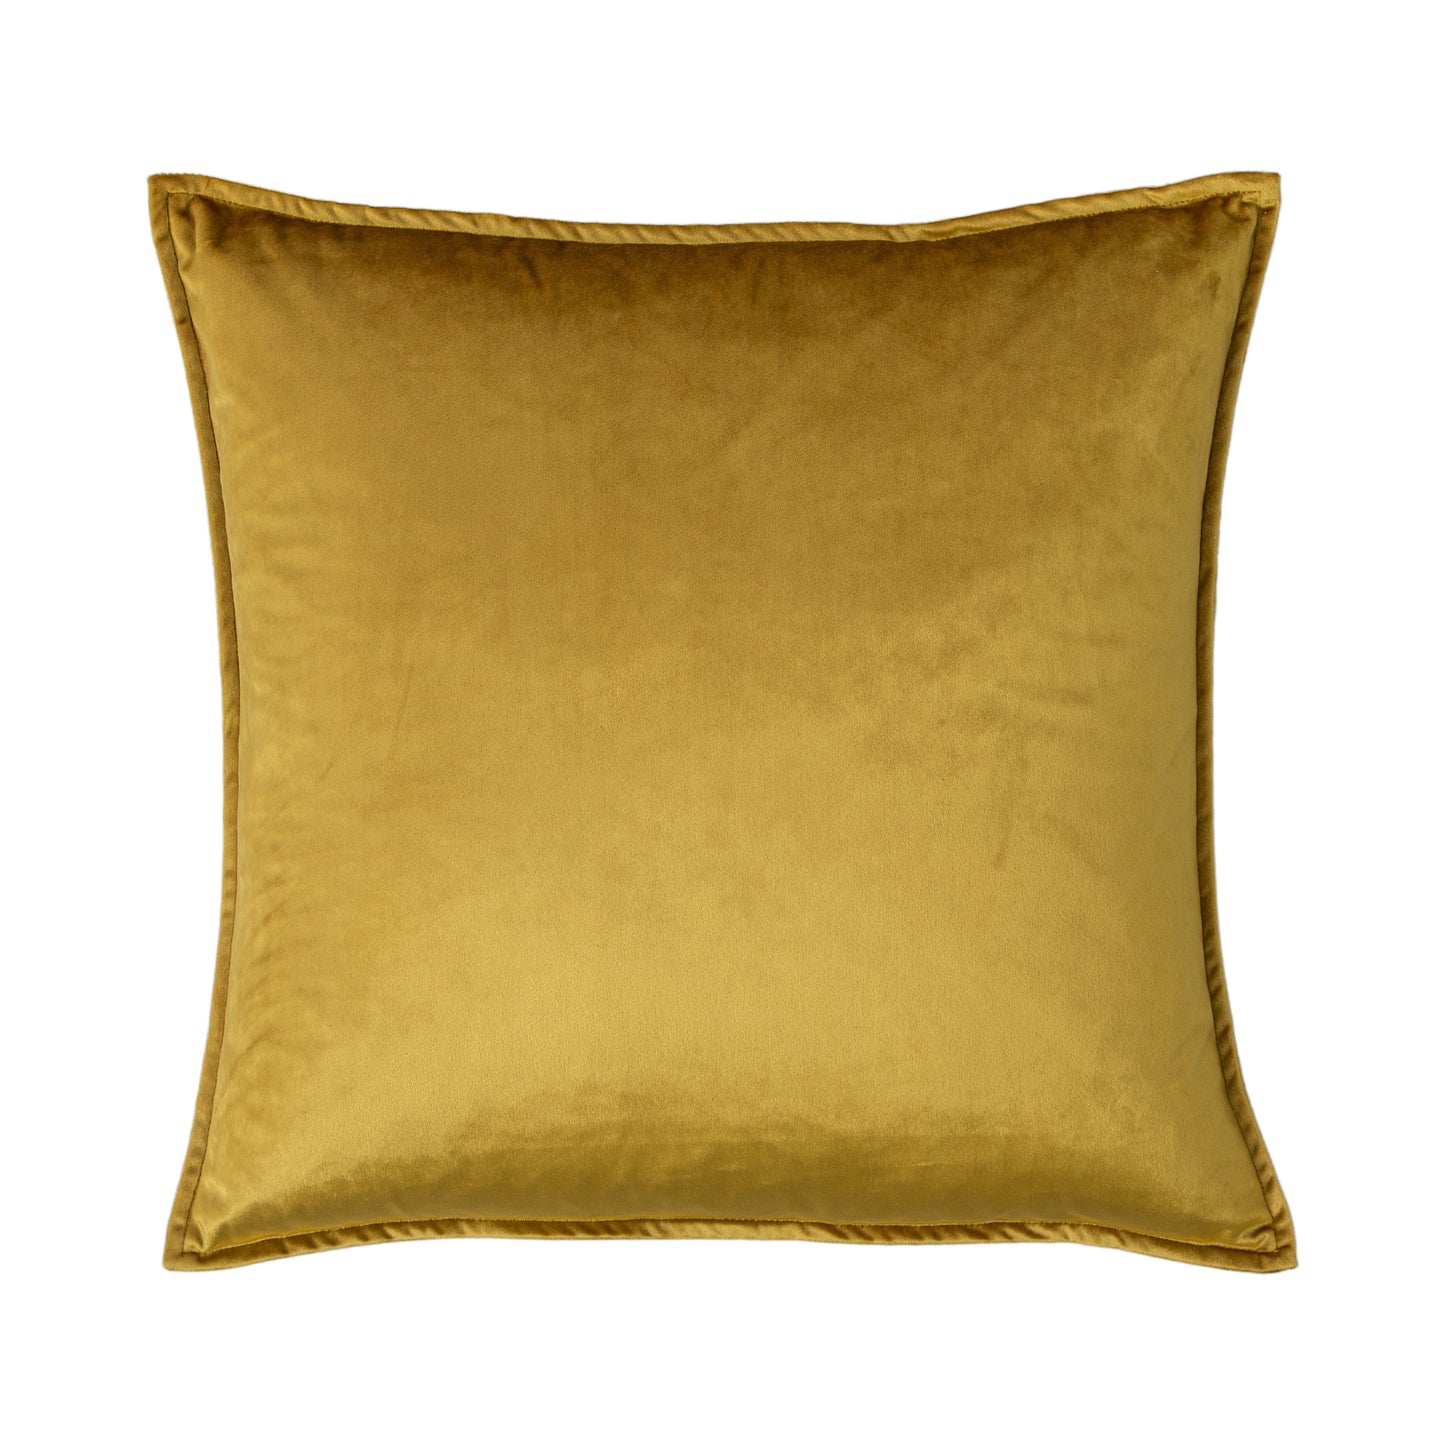 A Meto Velvet Oxford Cushion Gold 580x580mm for home furniture and interior decor on a white background.